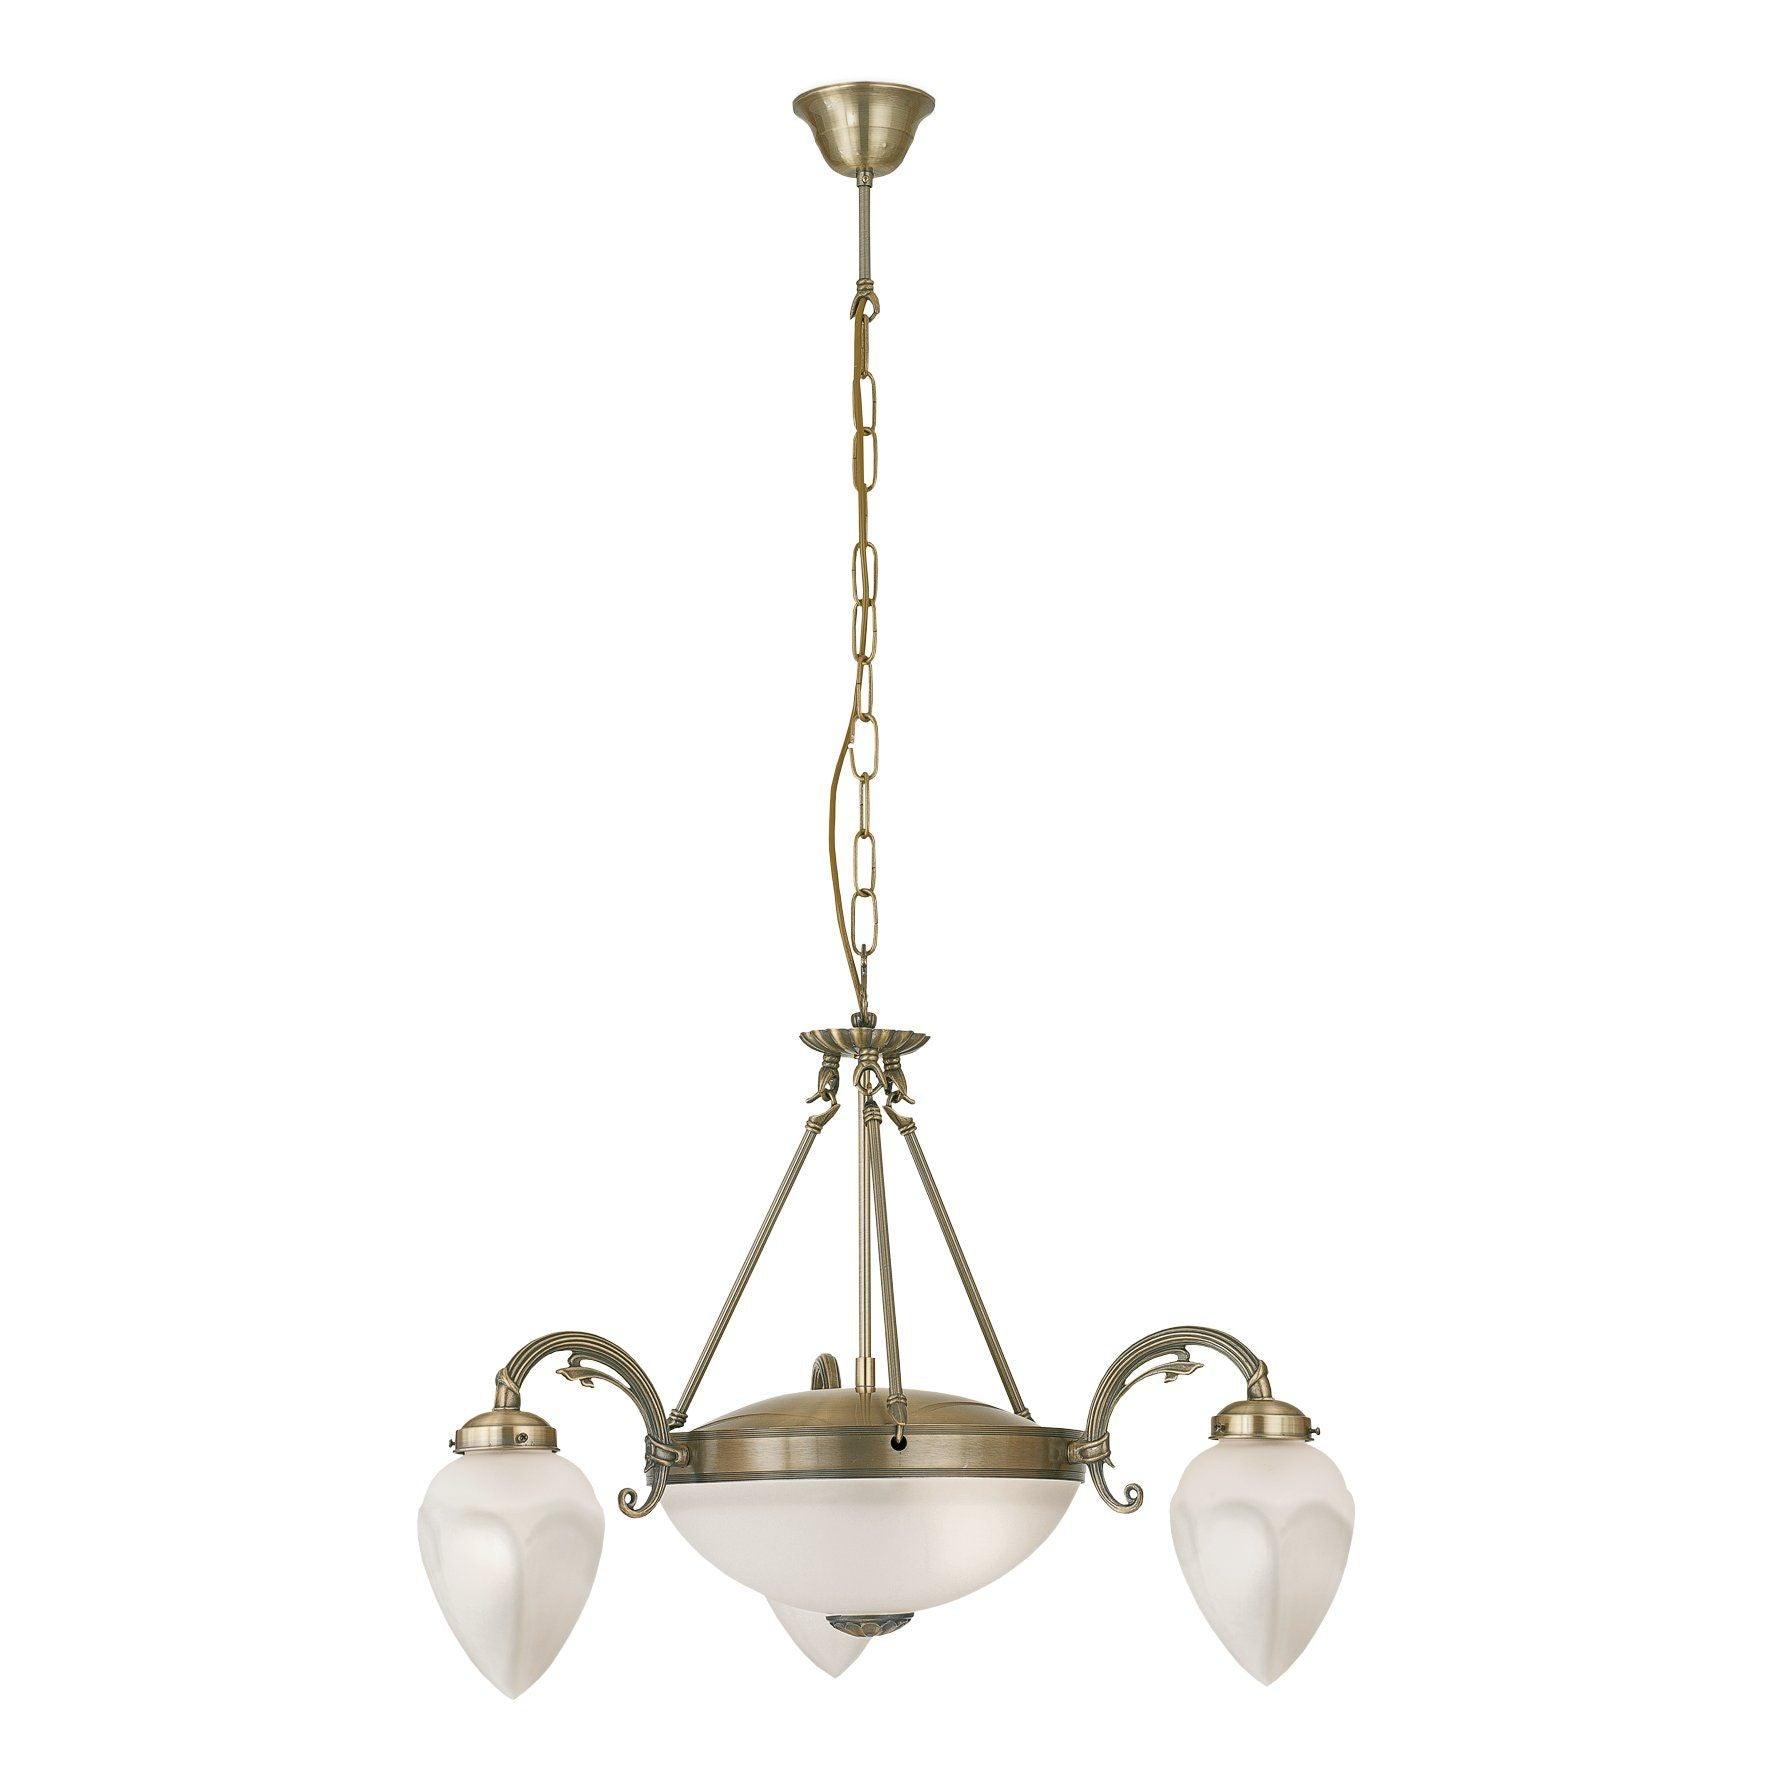 IMPERIAL pendant light by The Light Library